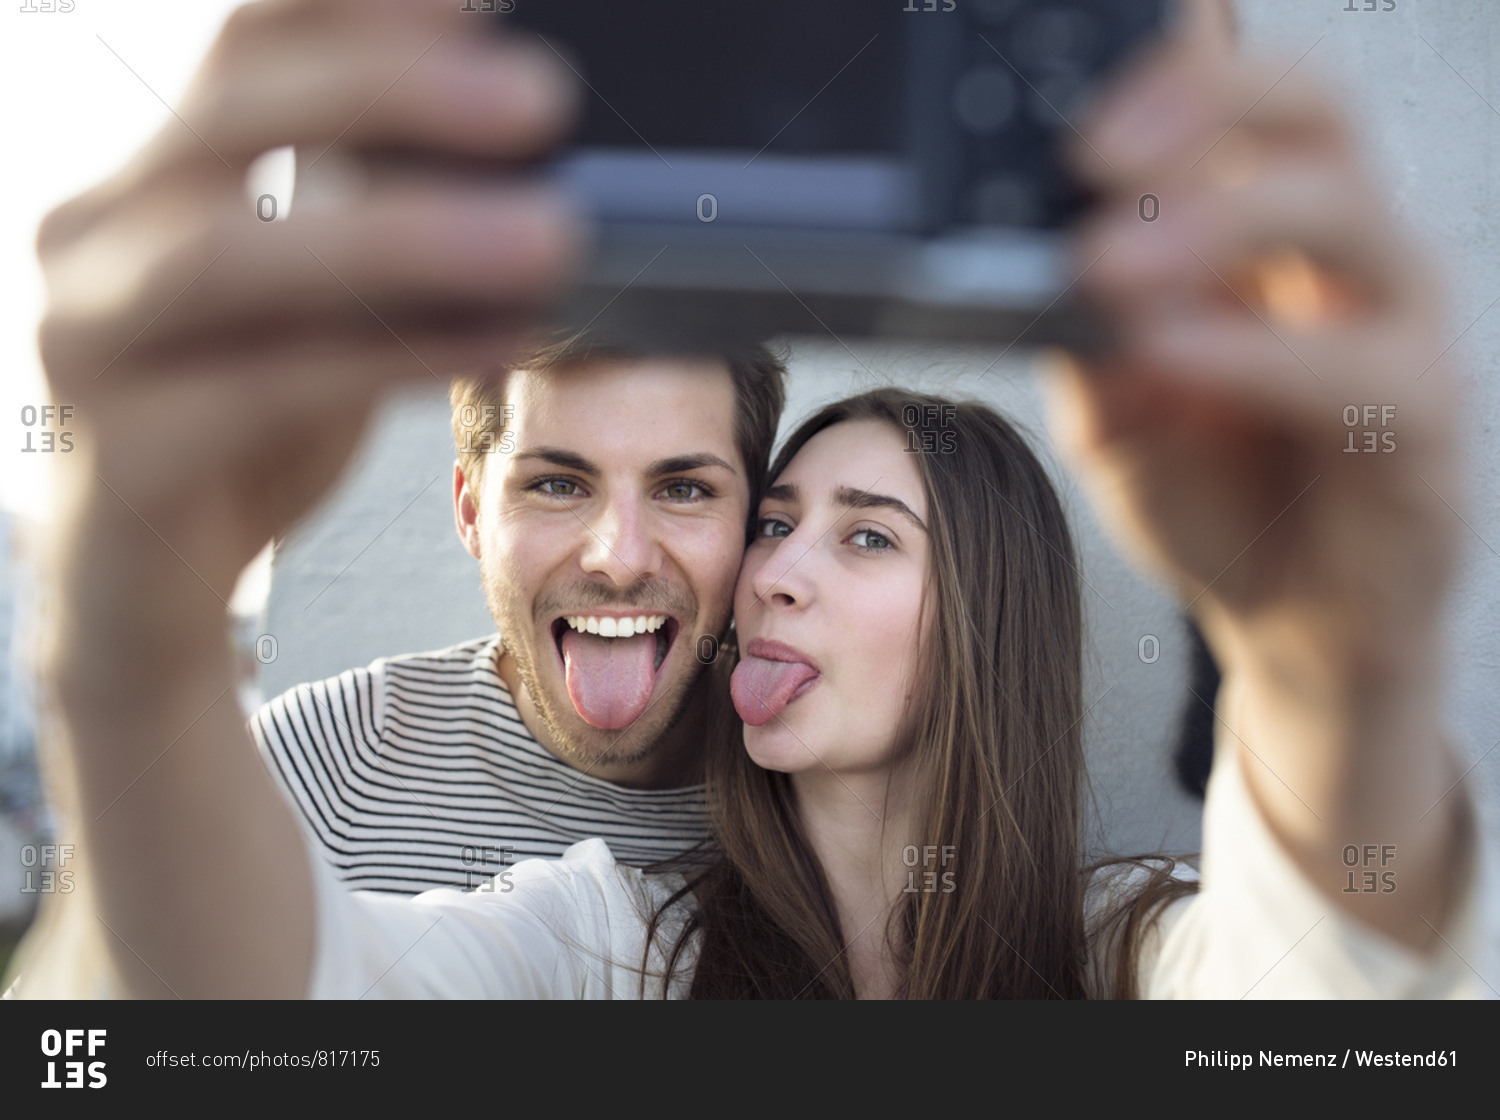 Playful young couple taking a selfie sticking tongues out